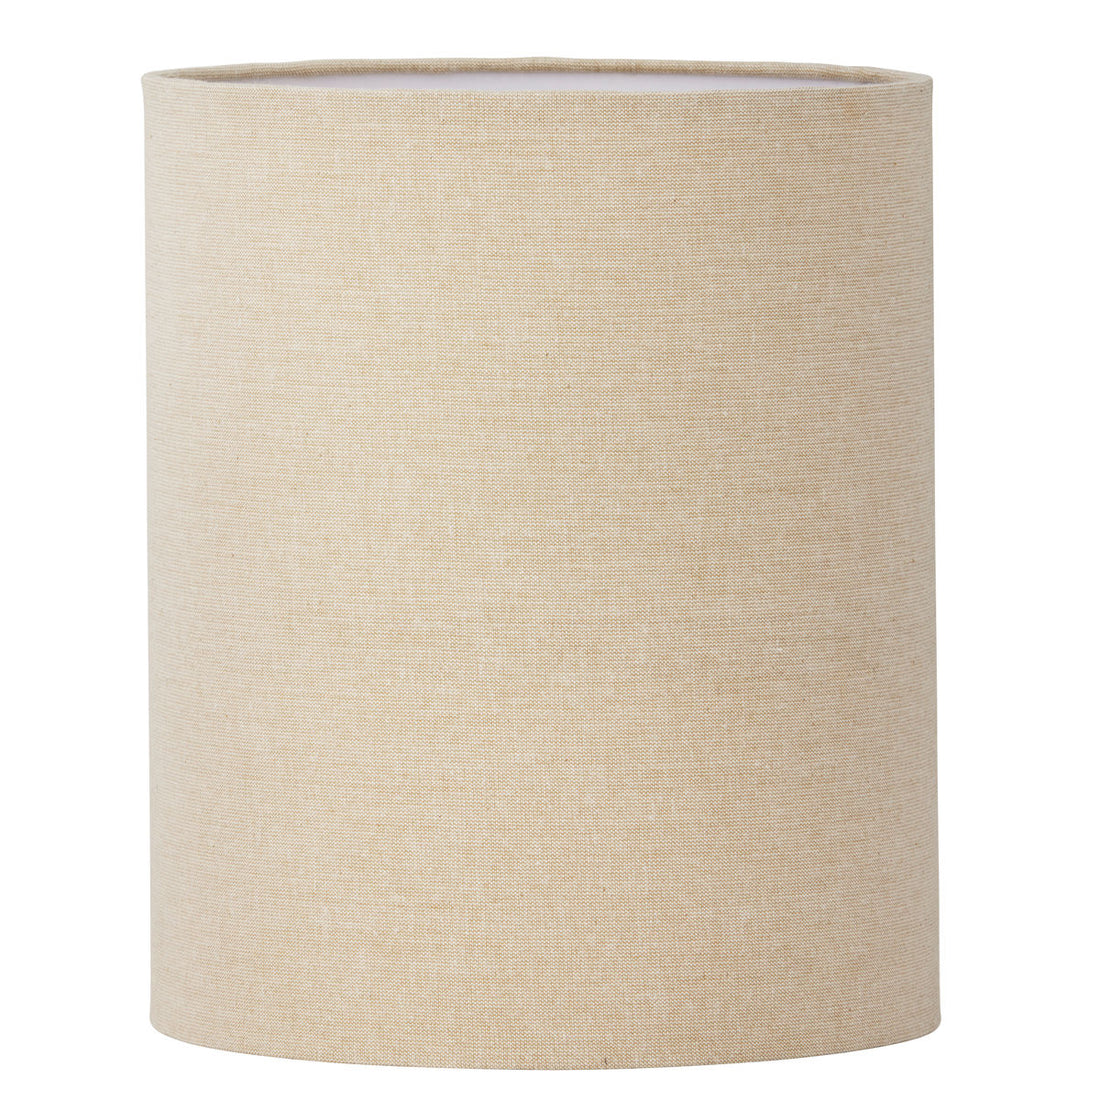 Cozy Living Gertrud Lampshade - Chambray Sand